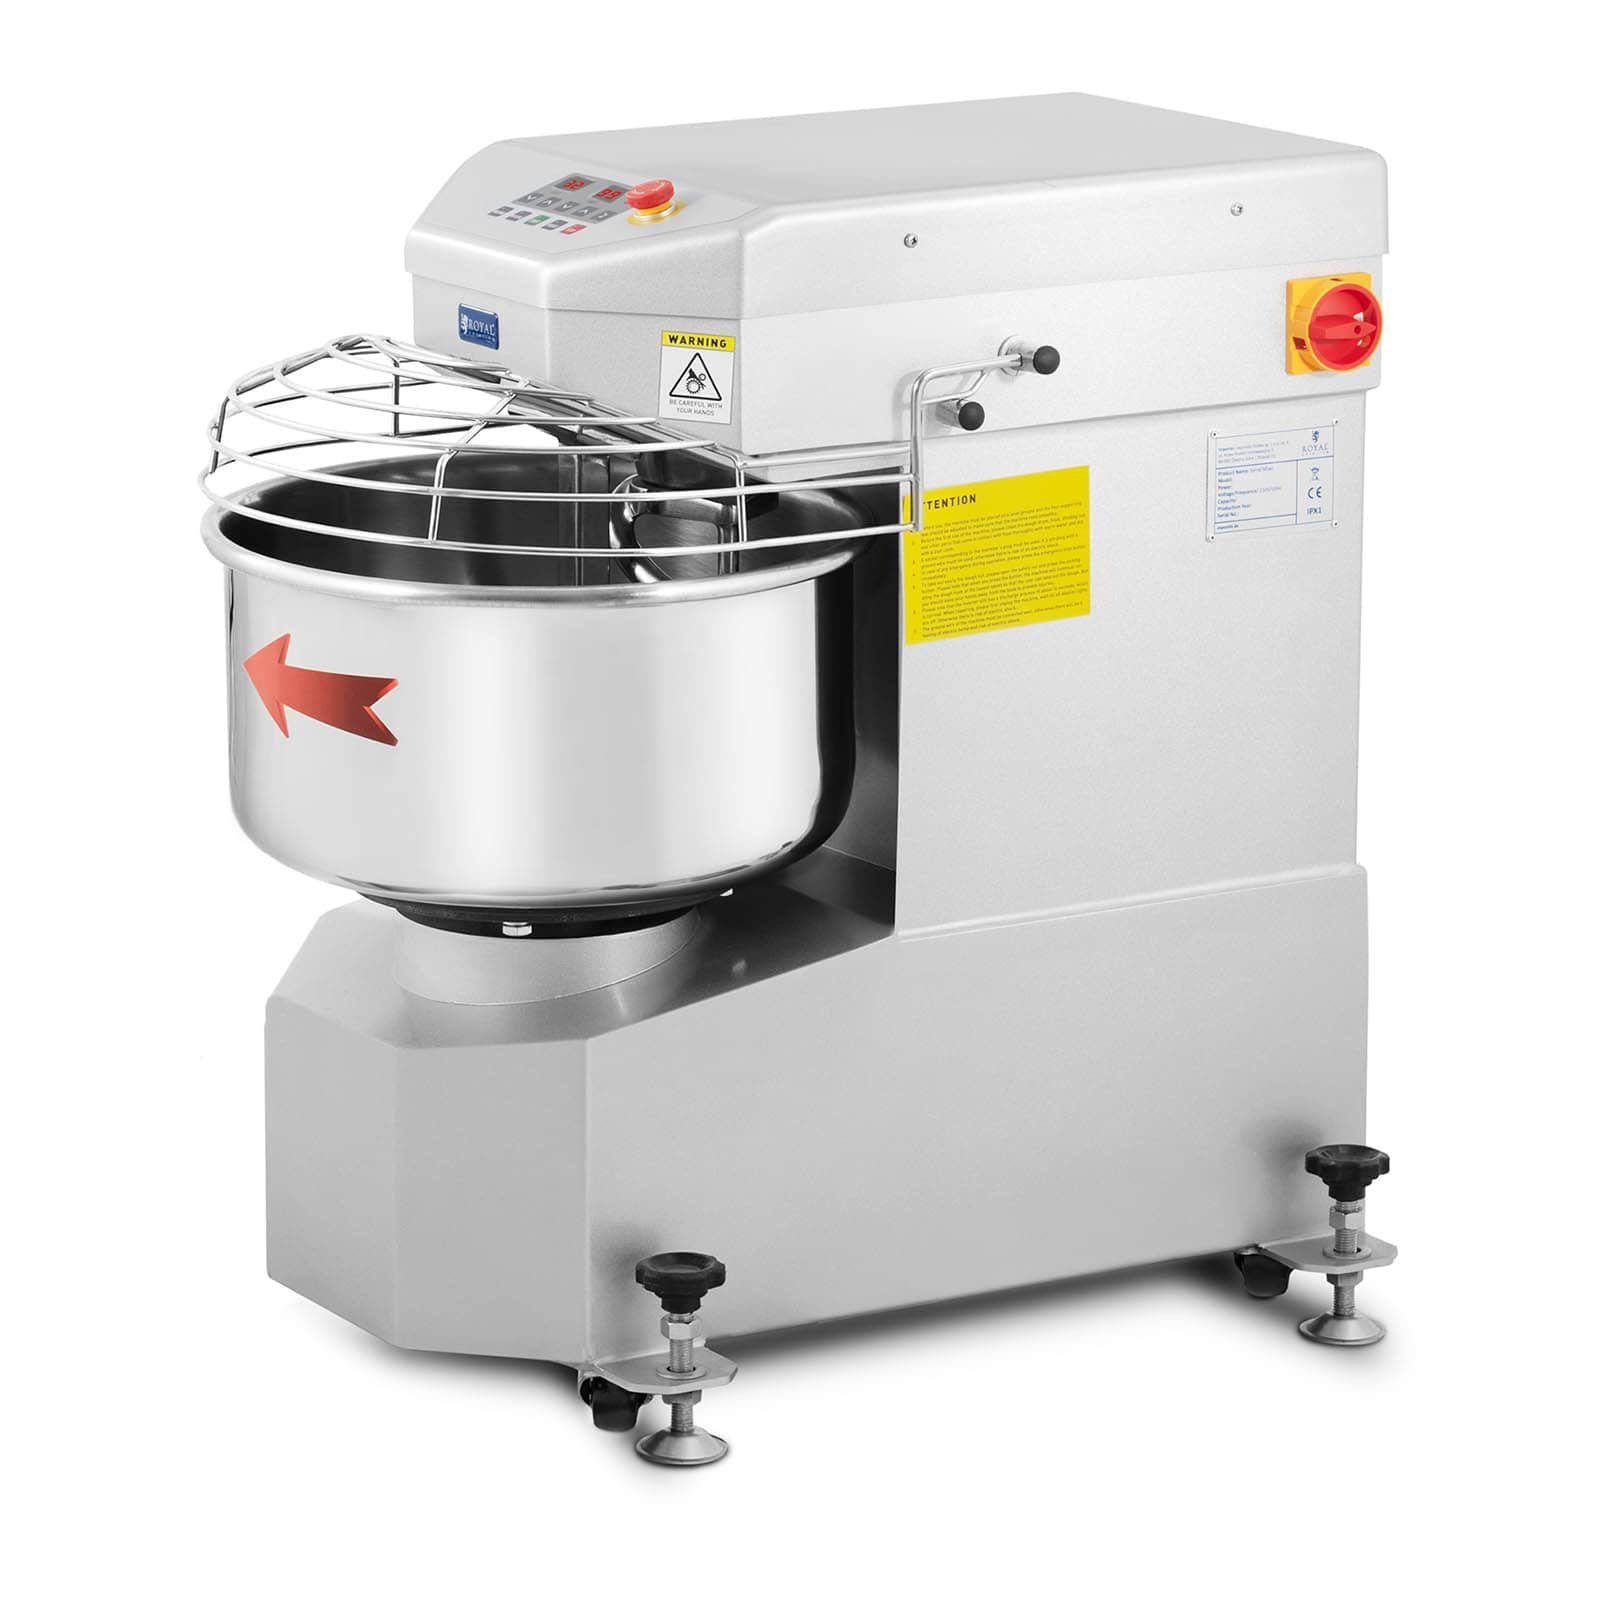 Royal Catering Küchenmaschine Knetmaschine - 23 L - Royal Catering - 1300 W